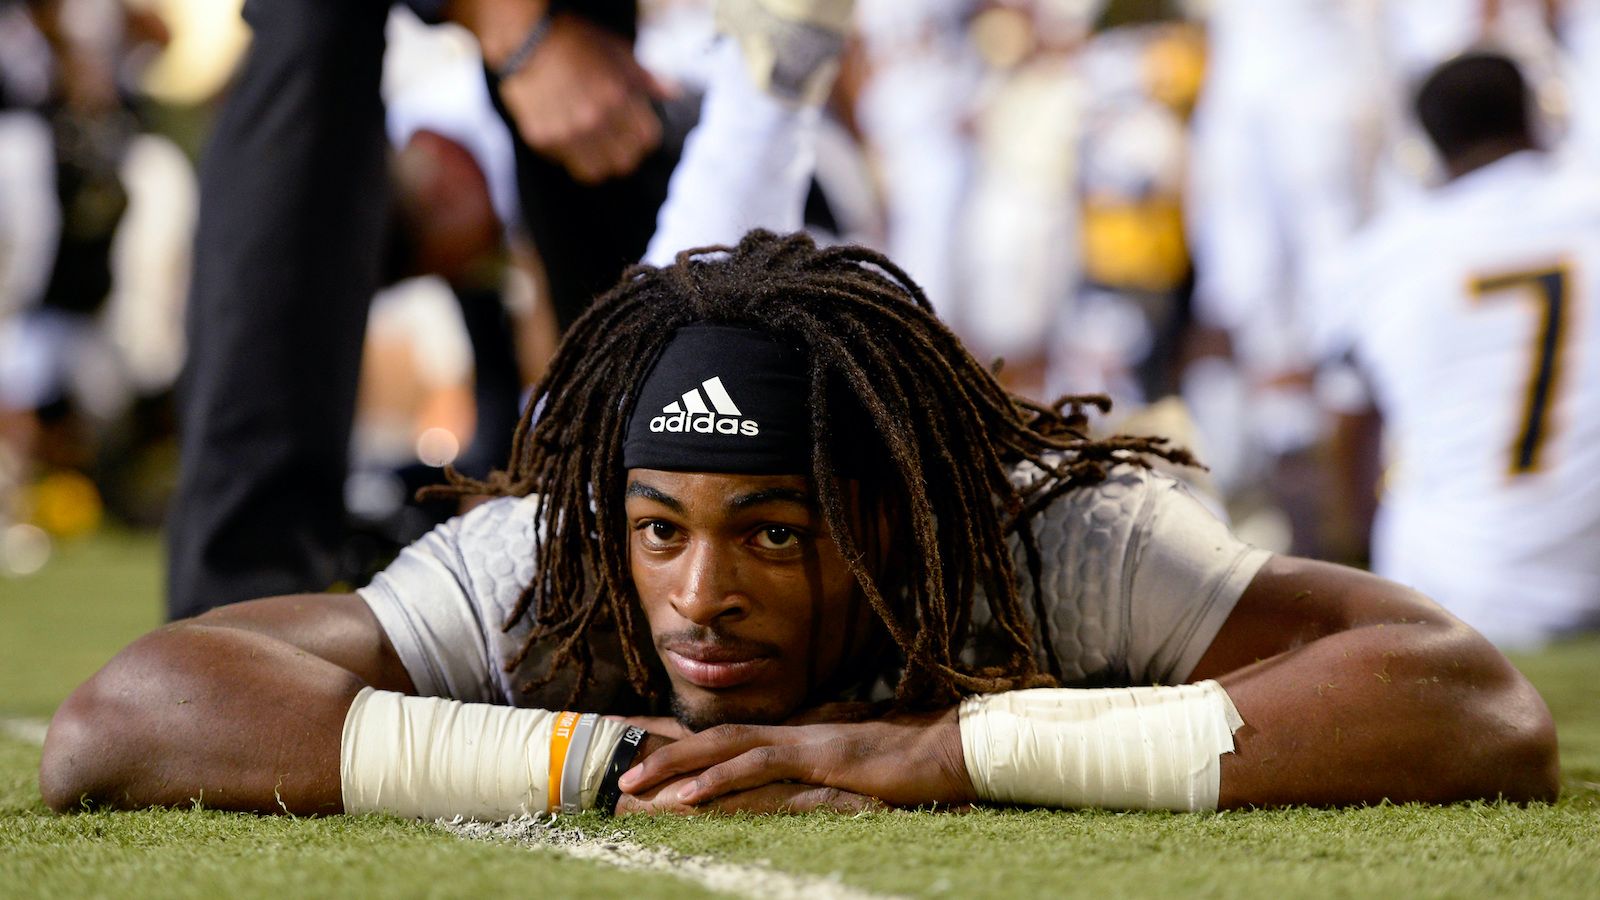  Why Did the Steelers Not Pick Najee Harris for Another Year? Inside Their Surprising Decision